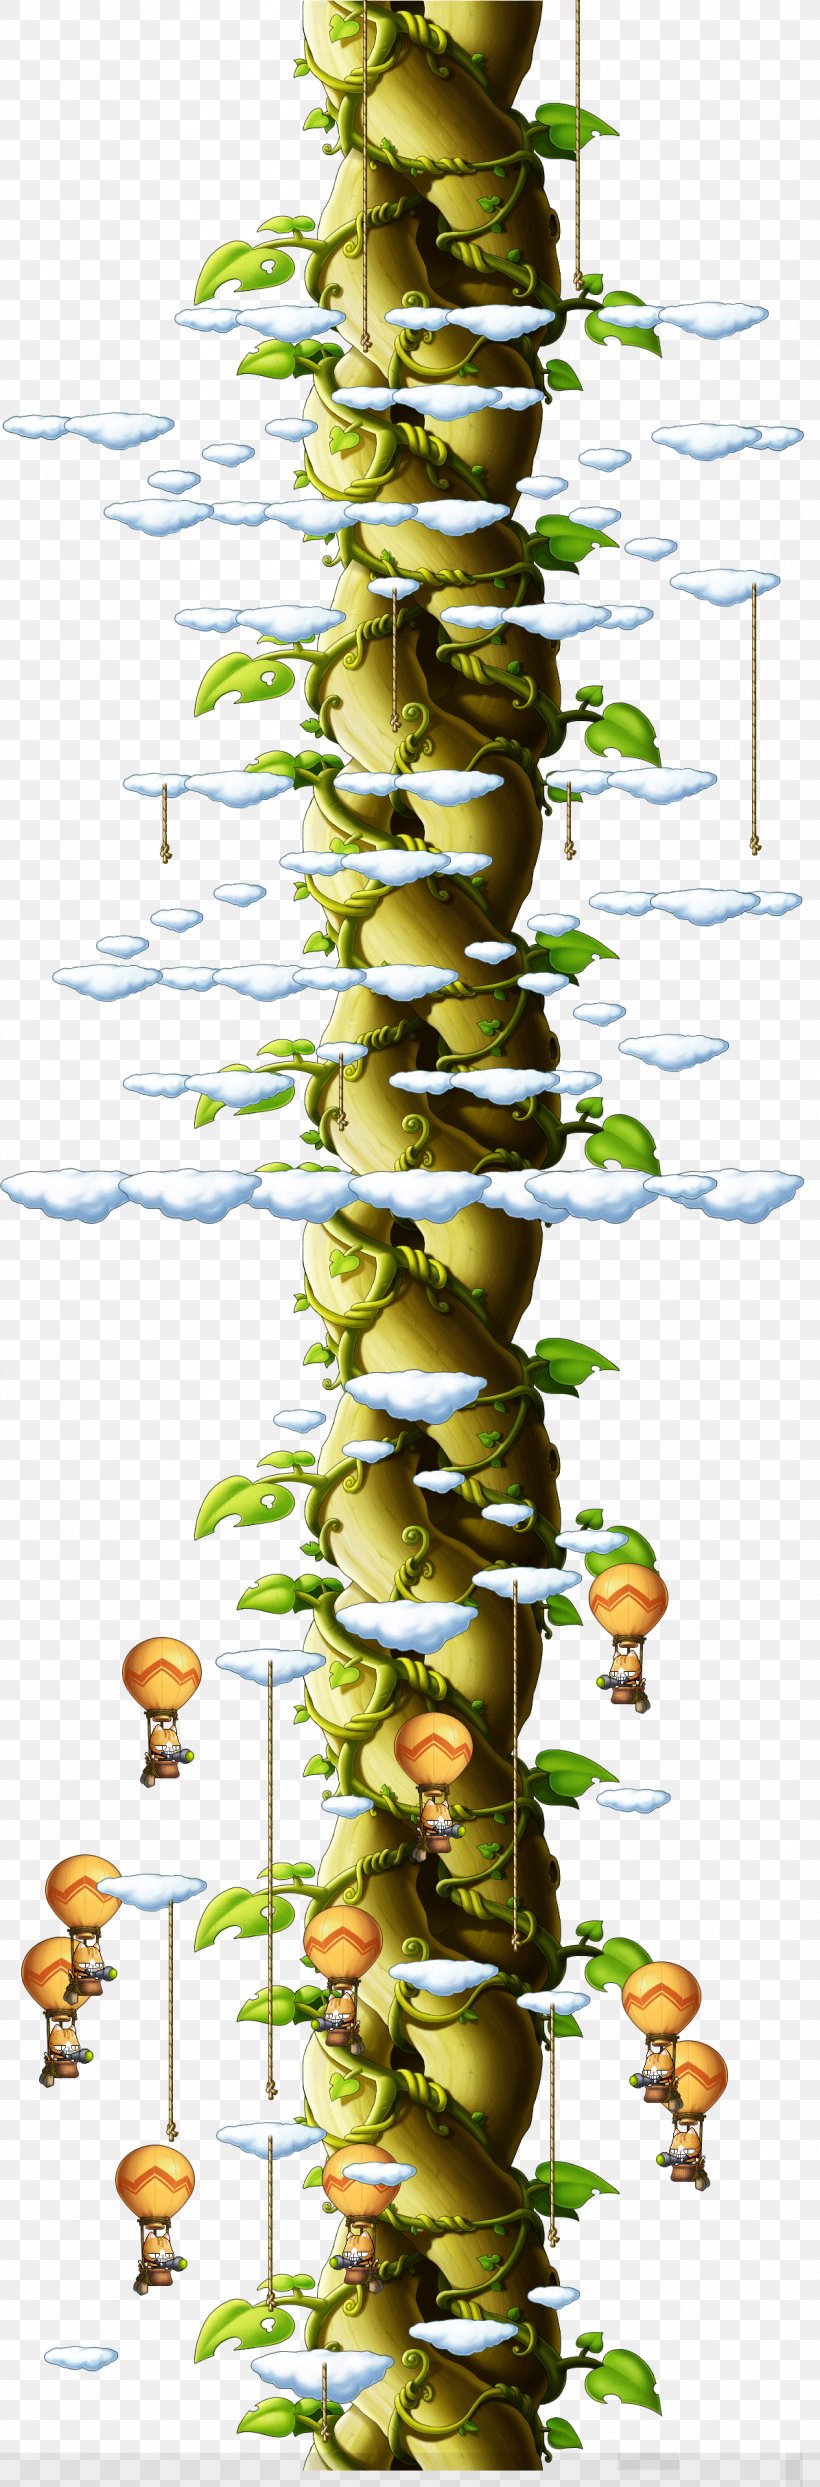 Green Pea Plant Stem Jack And The Beanstalk Leaf Flower, PNG, 1195x3625px, Green Pea, Branch, Flower, Jack And The Beanstalk, Leaf Download Free